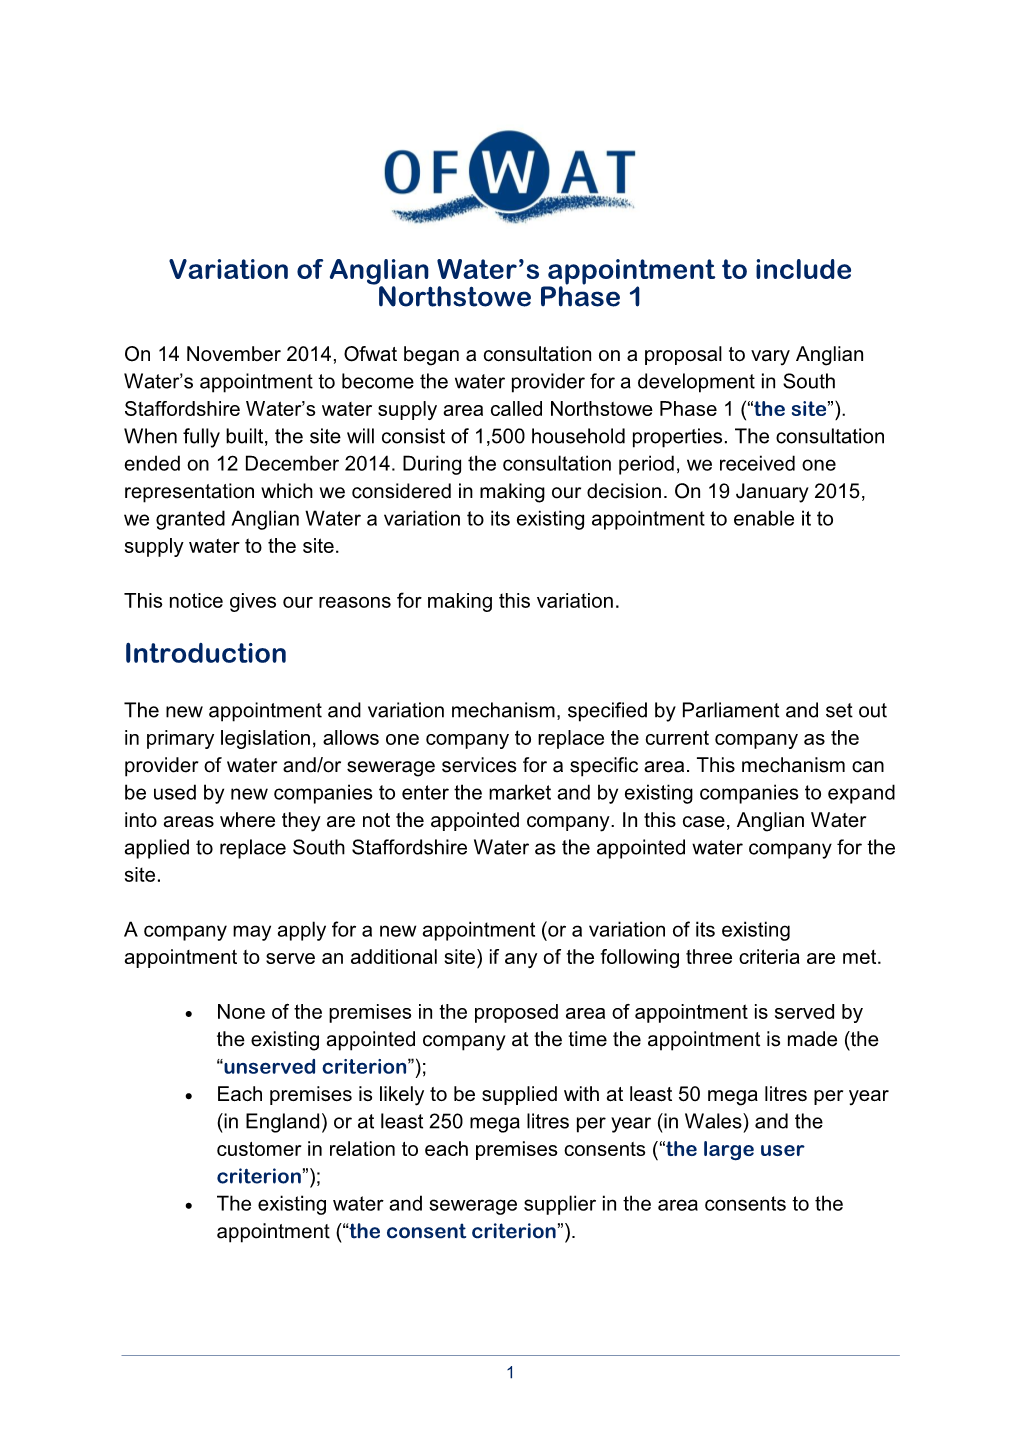 Variation of Anglian Water's Appointment to Include Northstowe Phase 1